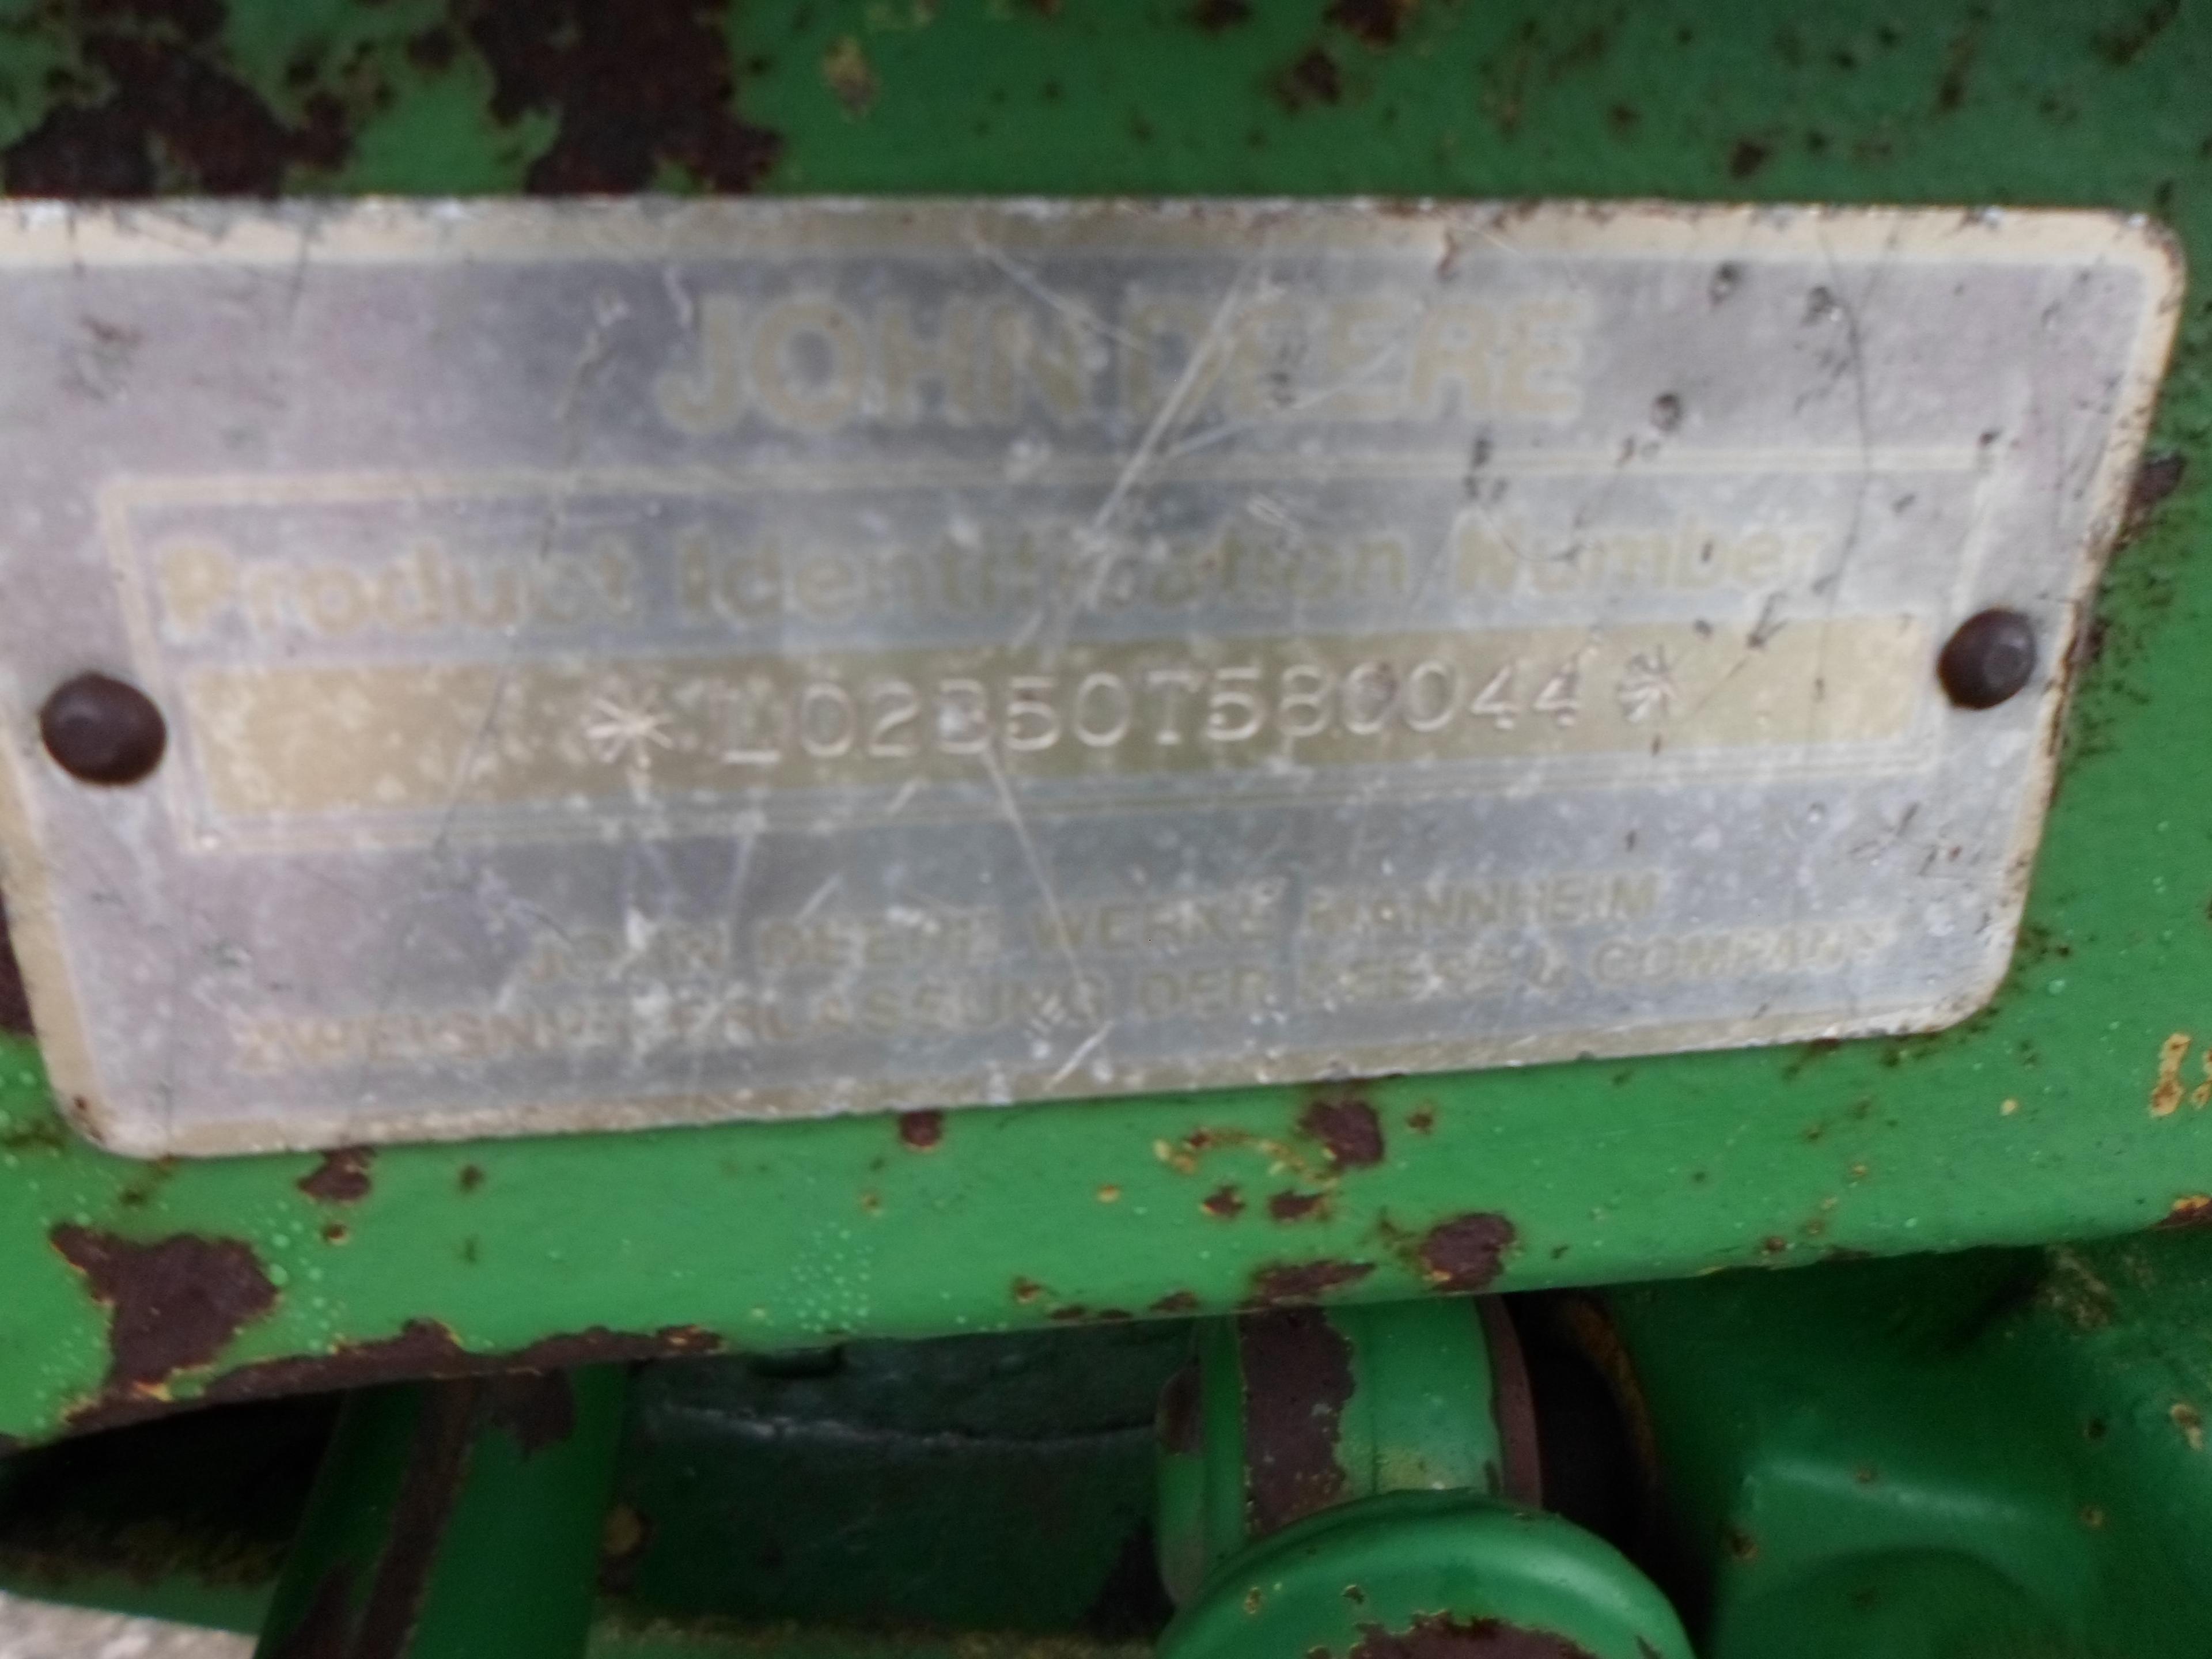 JD 2350 TRACTOR (SERIAL # L02350T580044) (UNKNOWN HOURS, UP TO THE BUYER TO DO THEIR DUE DILIGENCE T